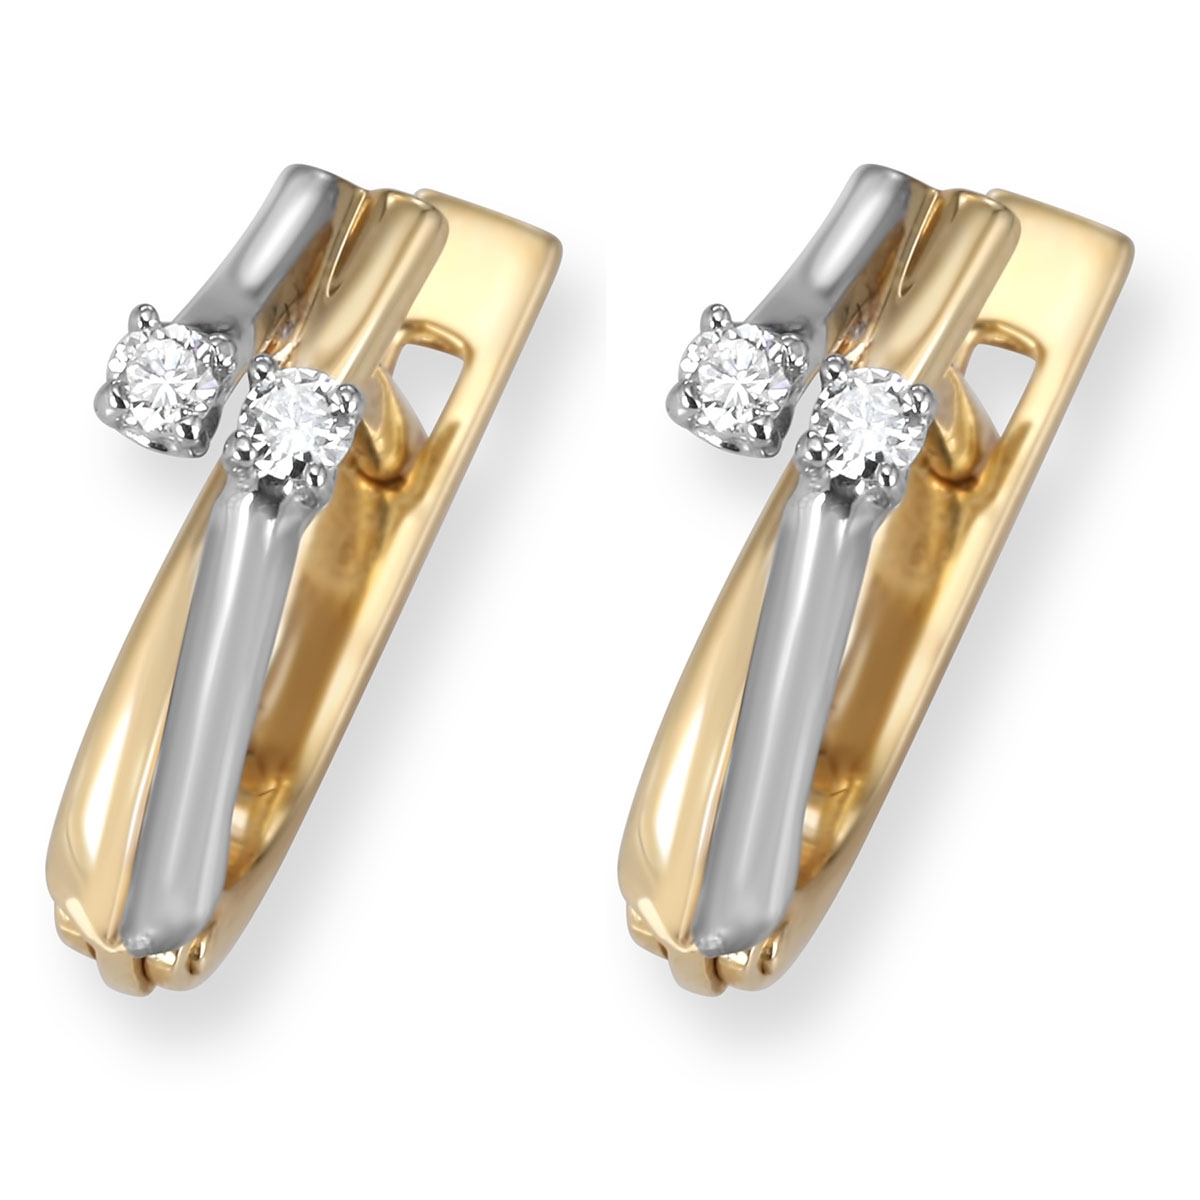 Exquisite Two-Toned 14K Gold Earrings With Diamonds - 1